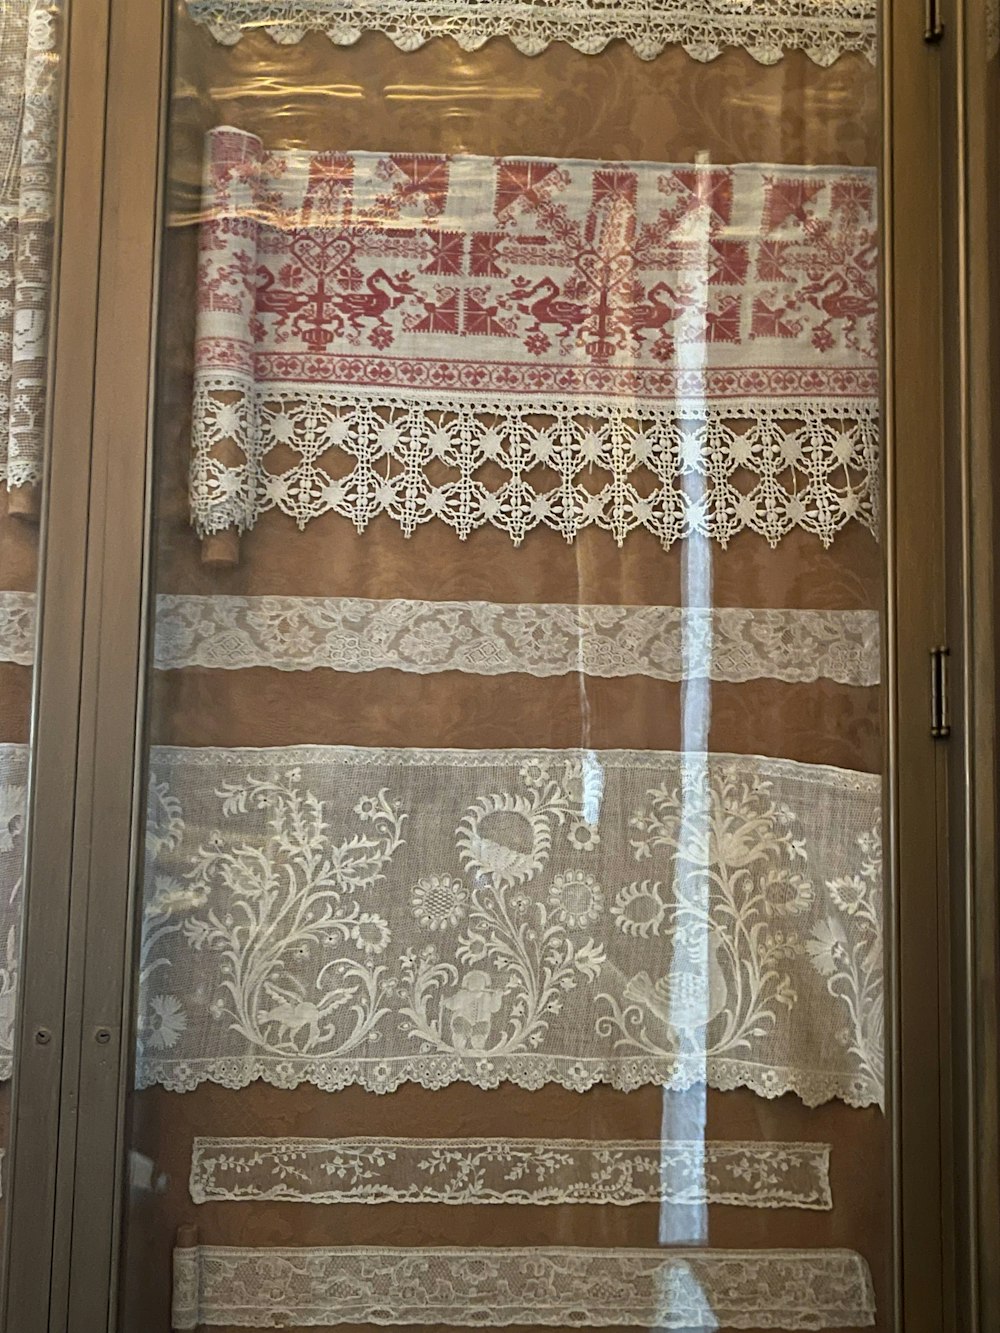 a window with a curtain and lace on it